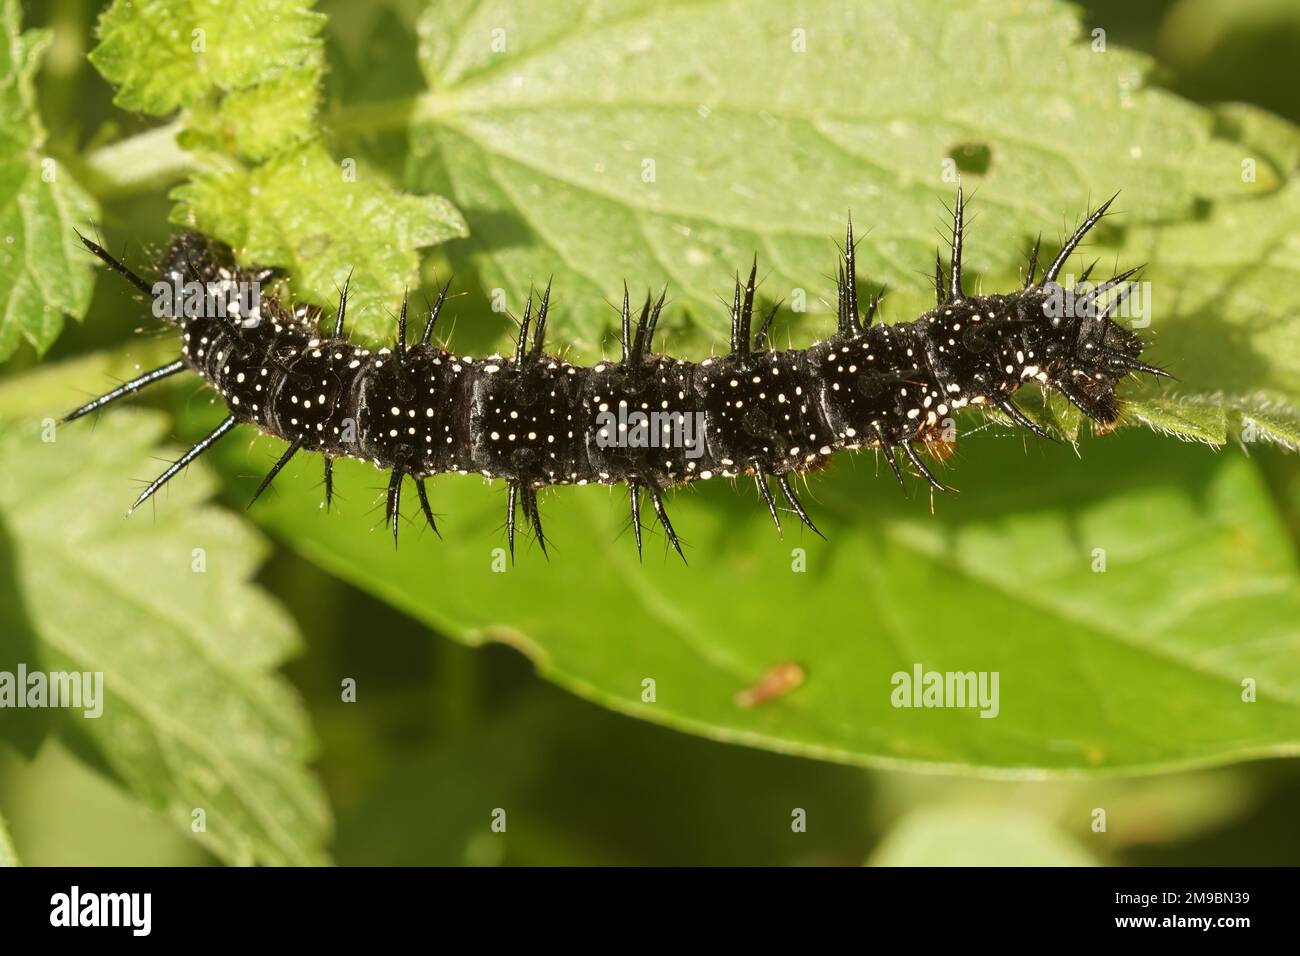 Natural the black caterpillar of the Peacock butterfly, Aglais io feeding on nettle in the garden Stock Photo - Alamy